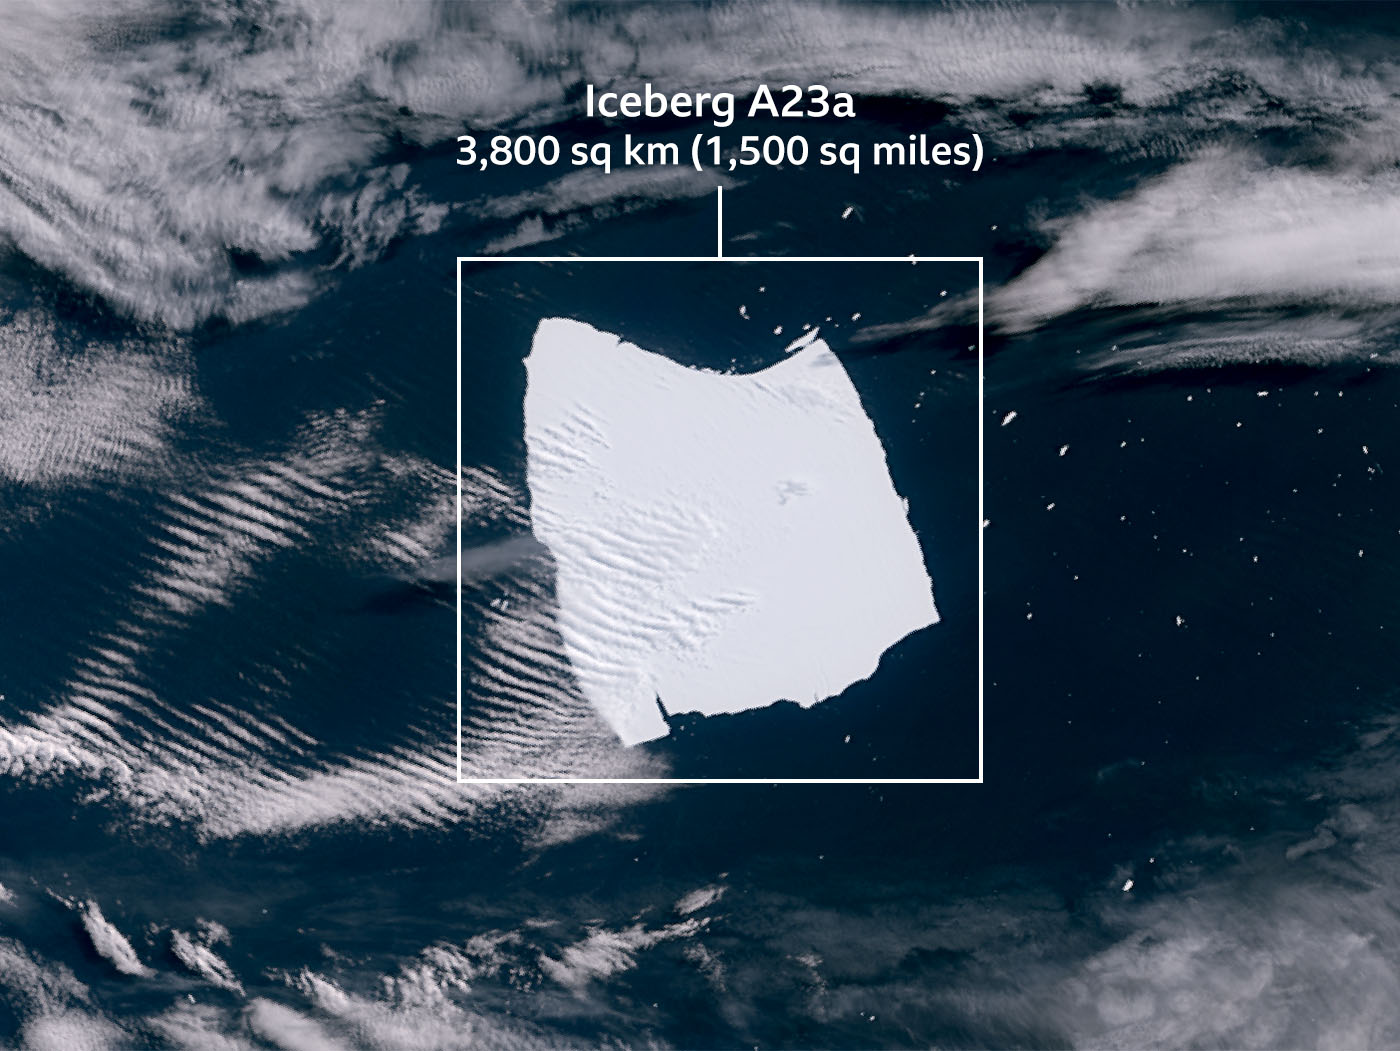 An image of the A23a iceberg taken by the Copernicus Sentinel-3 satellite